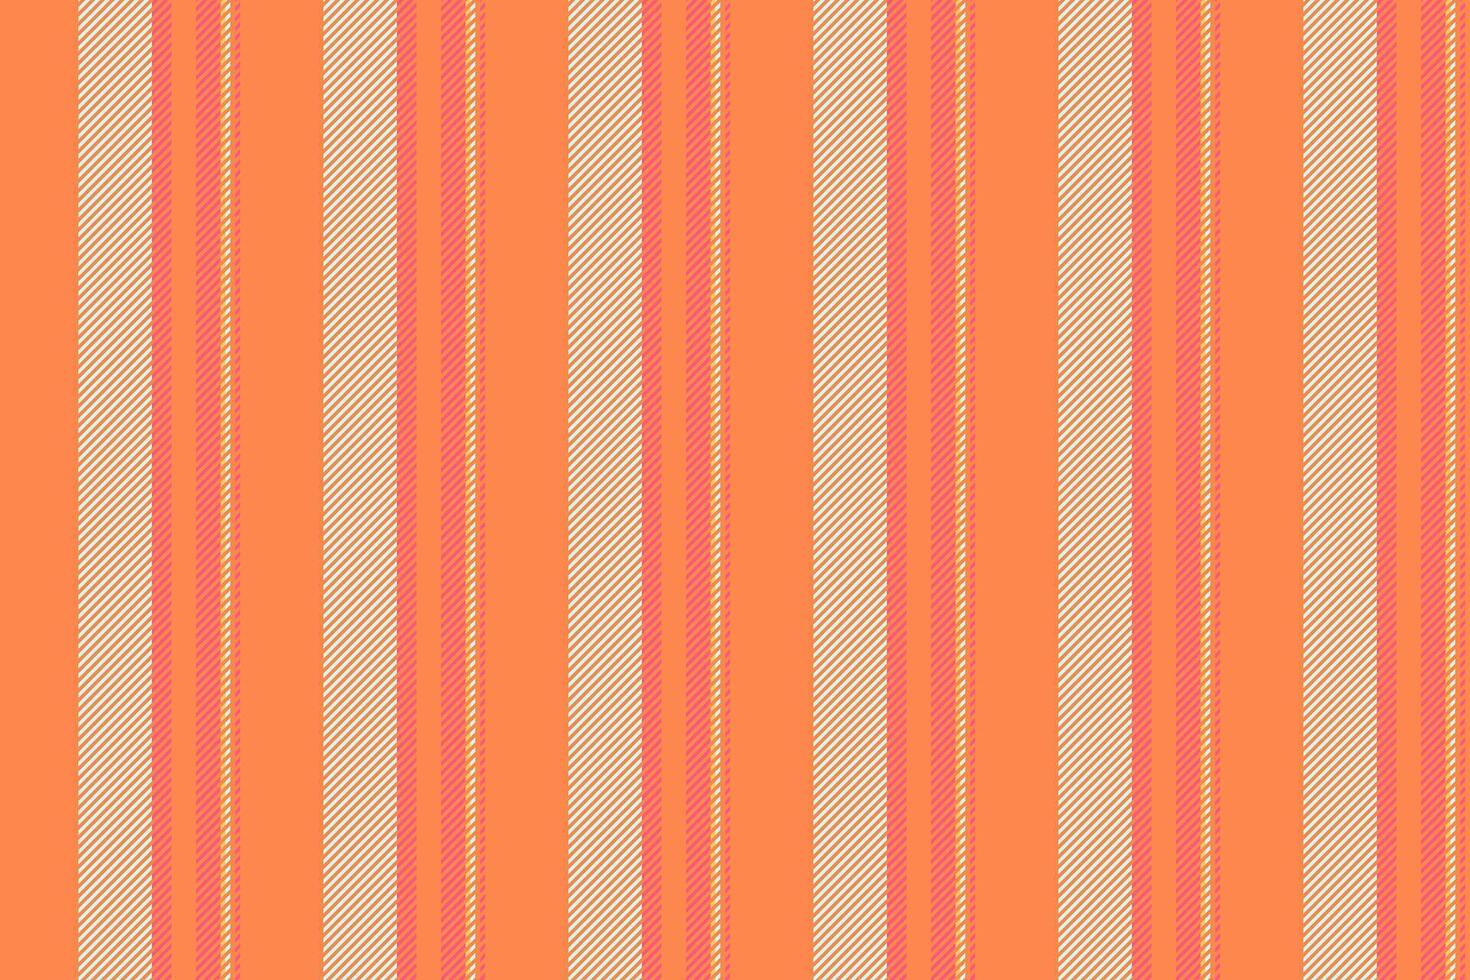 Pattern vertical vector of texture textile background with a lines fabric seamless stripe.